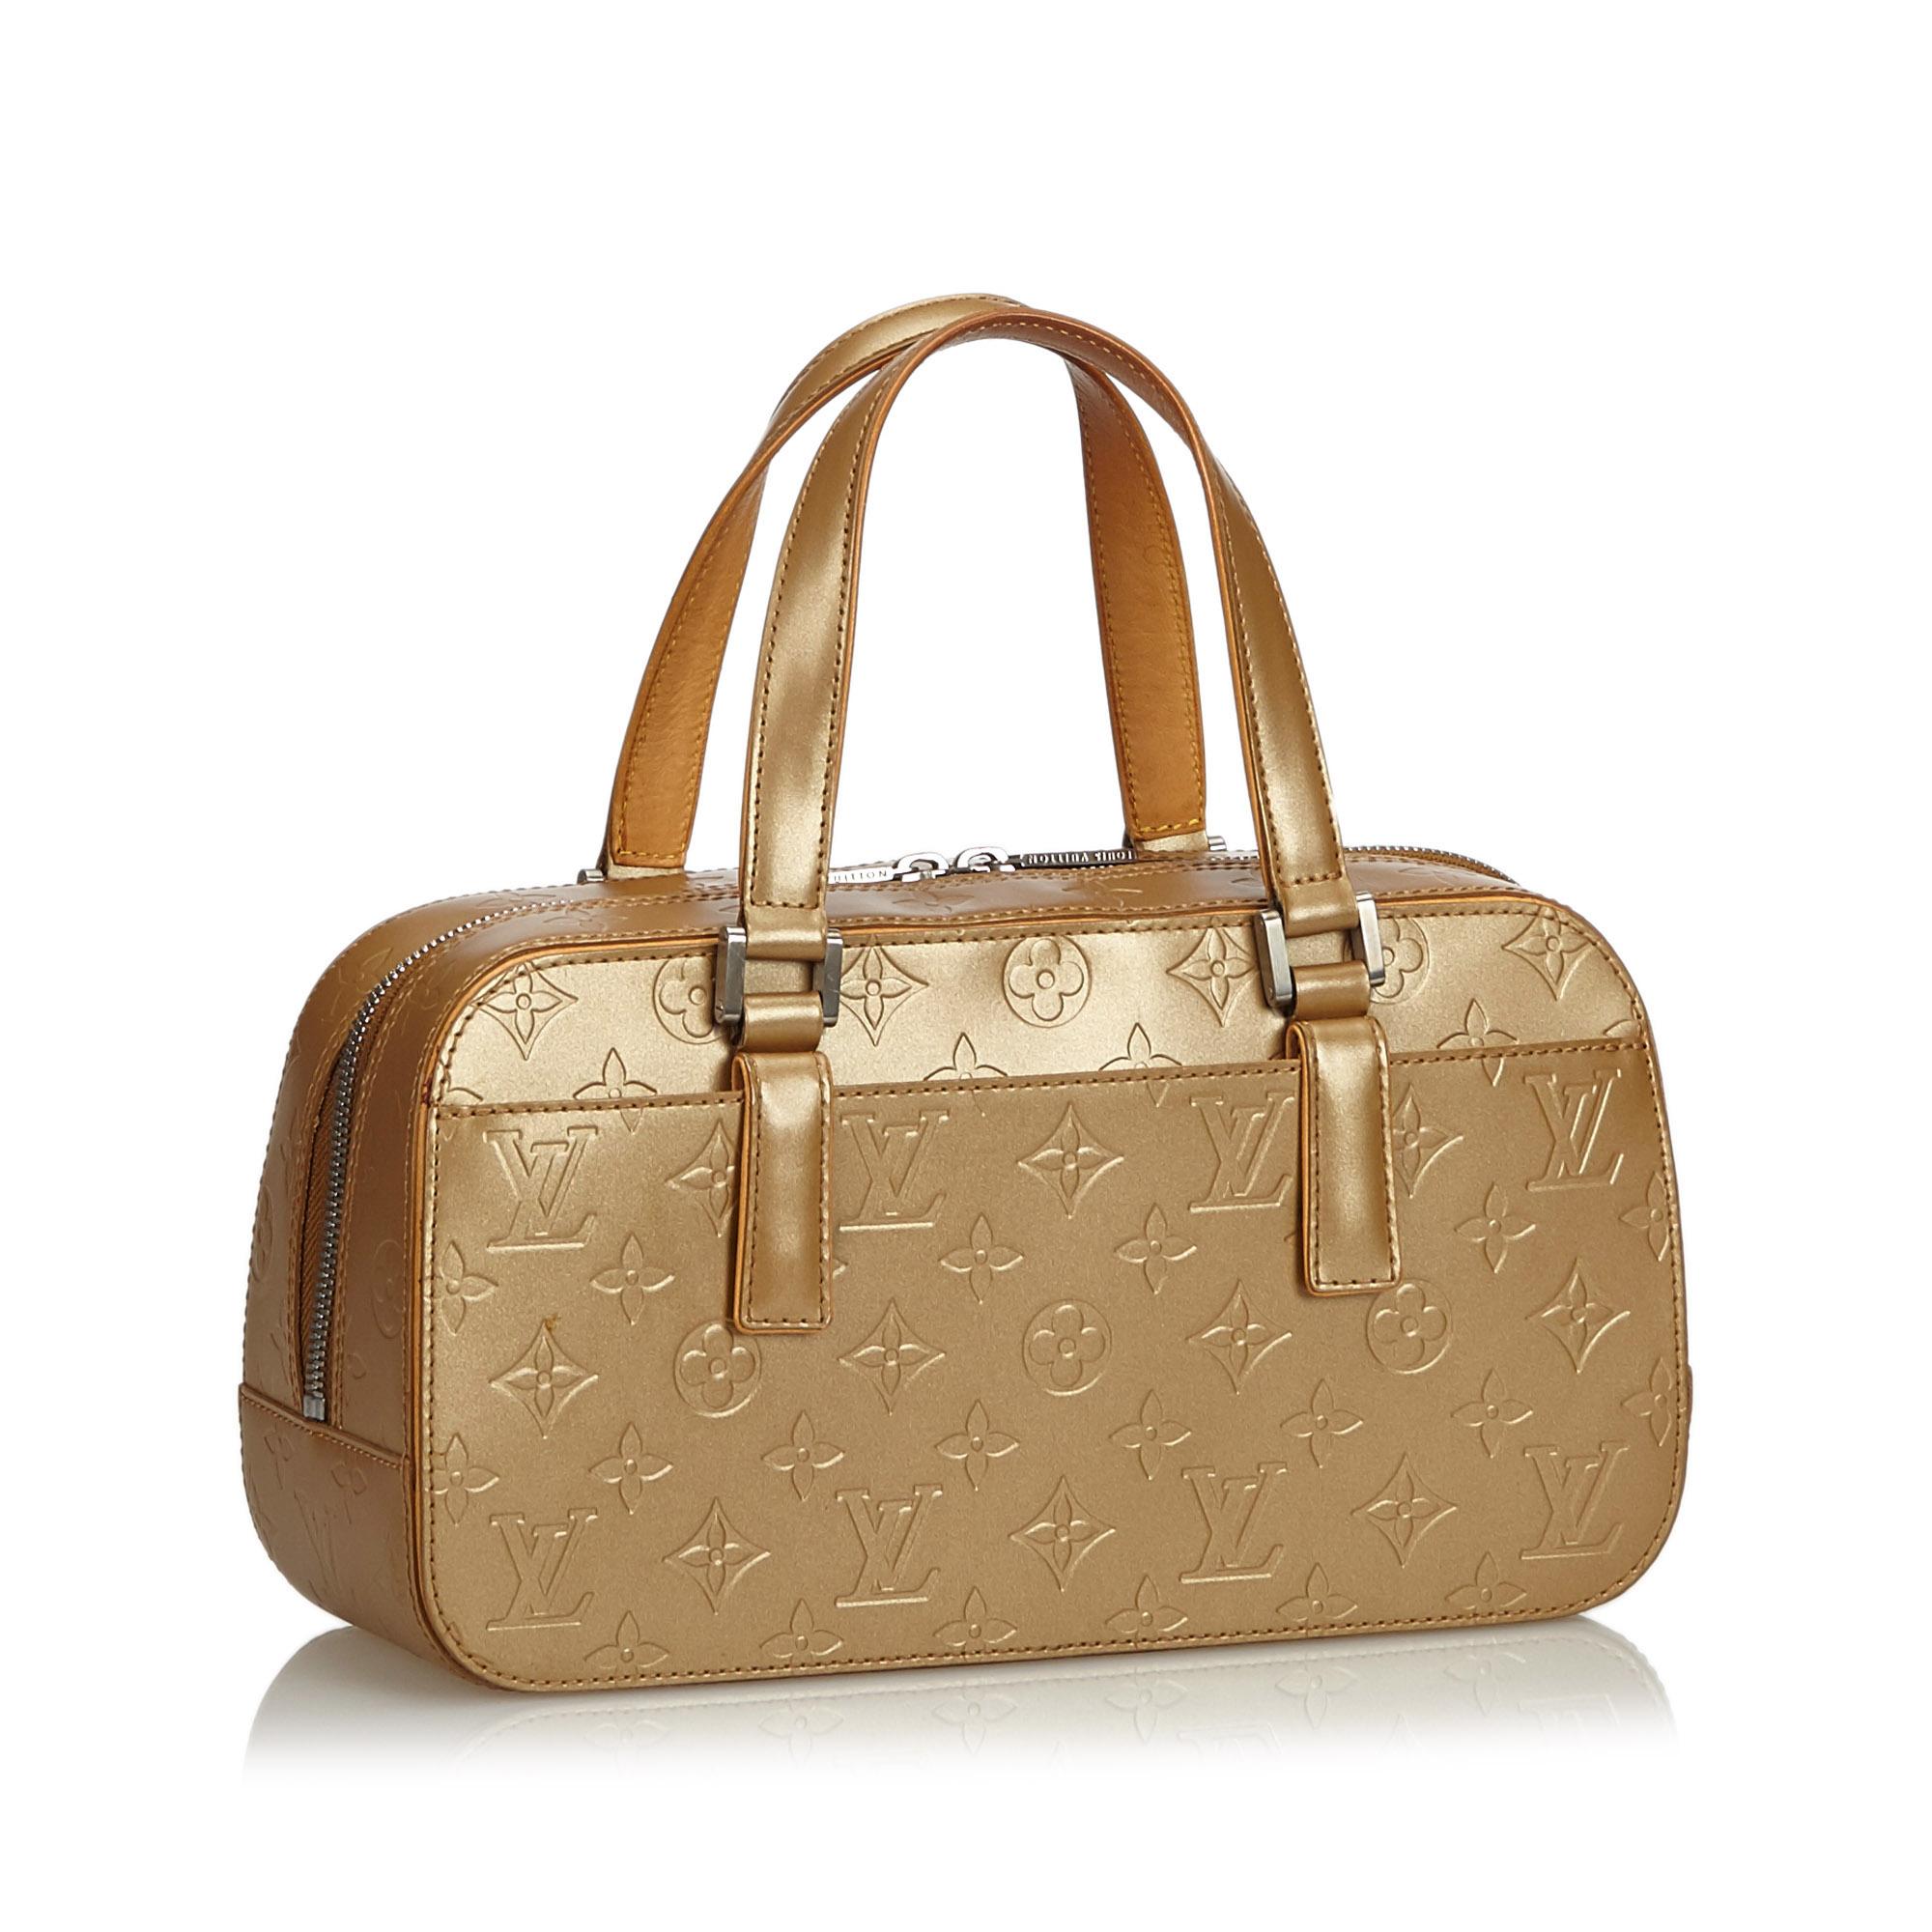 The Shelton features the Monogram Glace, flat shoulder straps, a two-way top zip closure, an exterior pocket, and an interior zip pocket. It carries as B+ condition rating.

Inclusions: 
This item does not come with inclusions.


Louis Vuitton